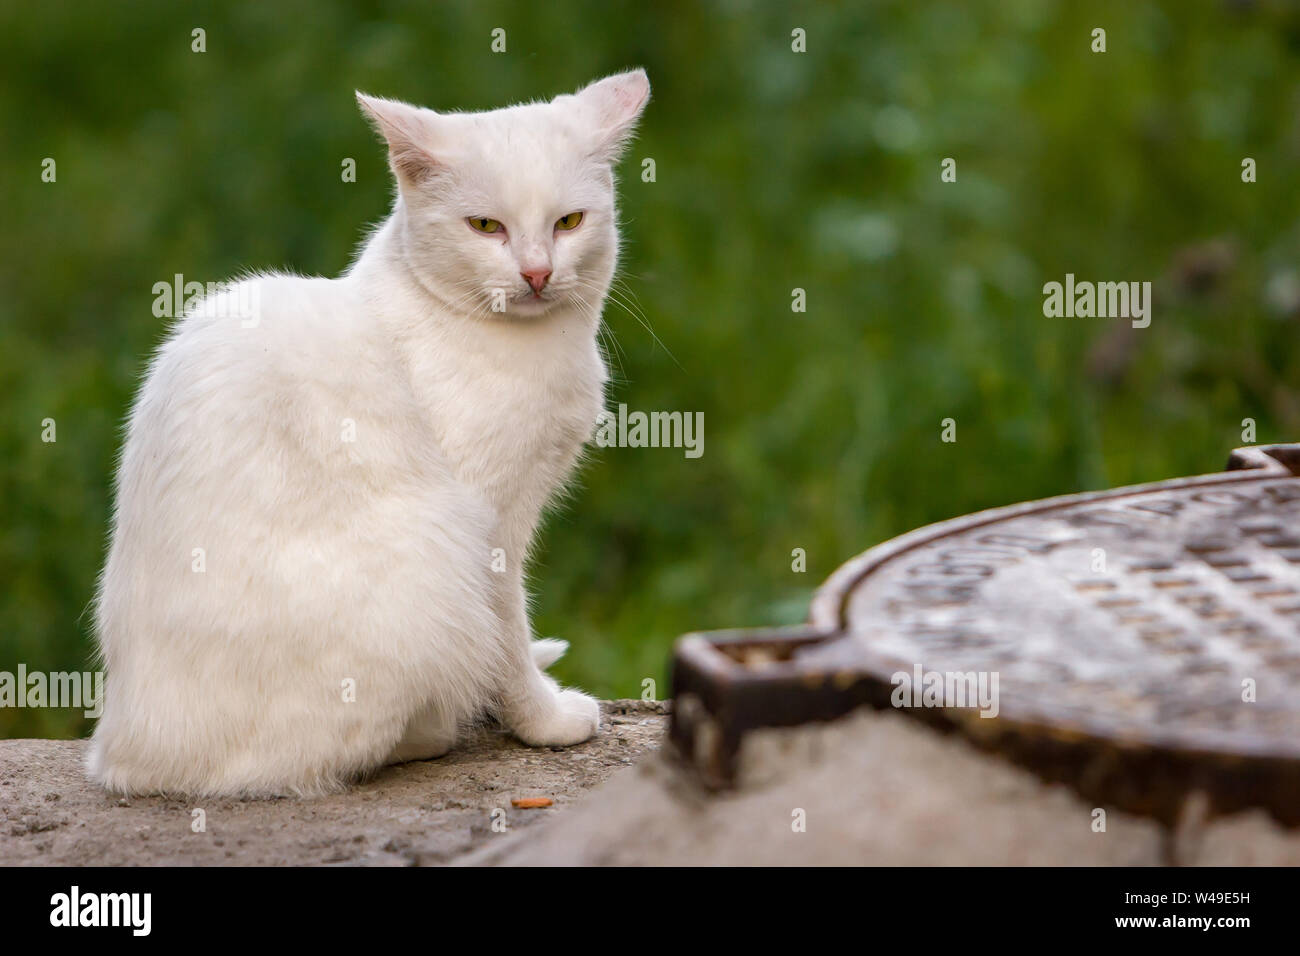 A lone white cat sits and looks into the camera near the manhole cover. Grass in the background. The background is blurred. Manhole cover blurred. Stock Photo